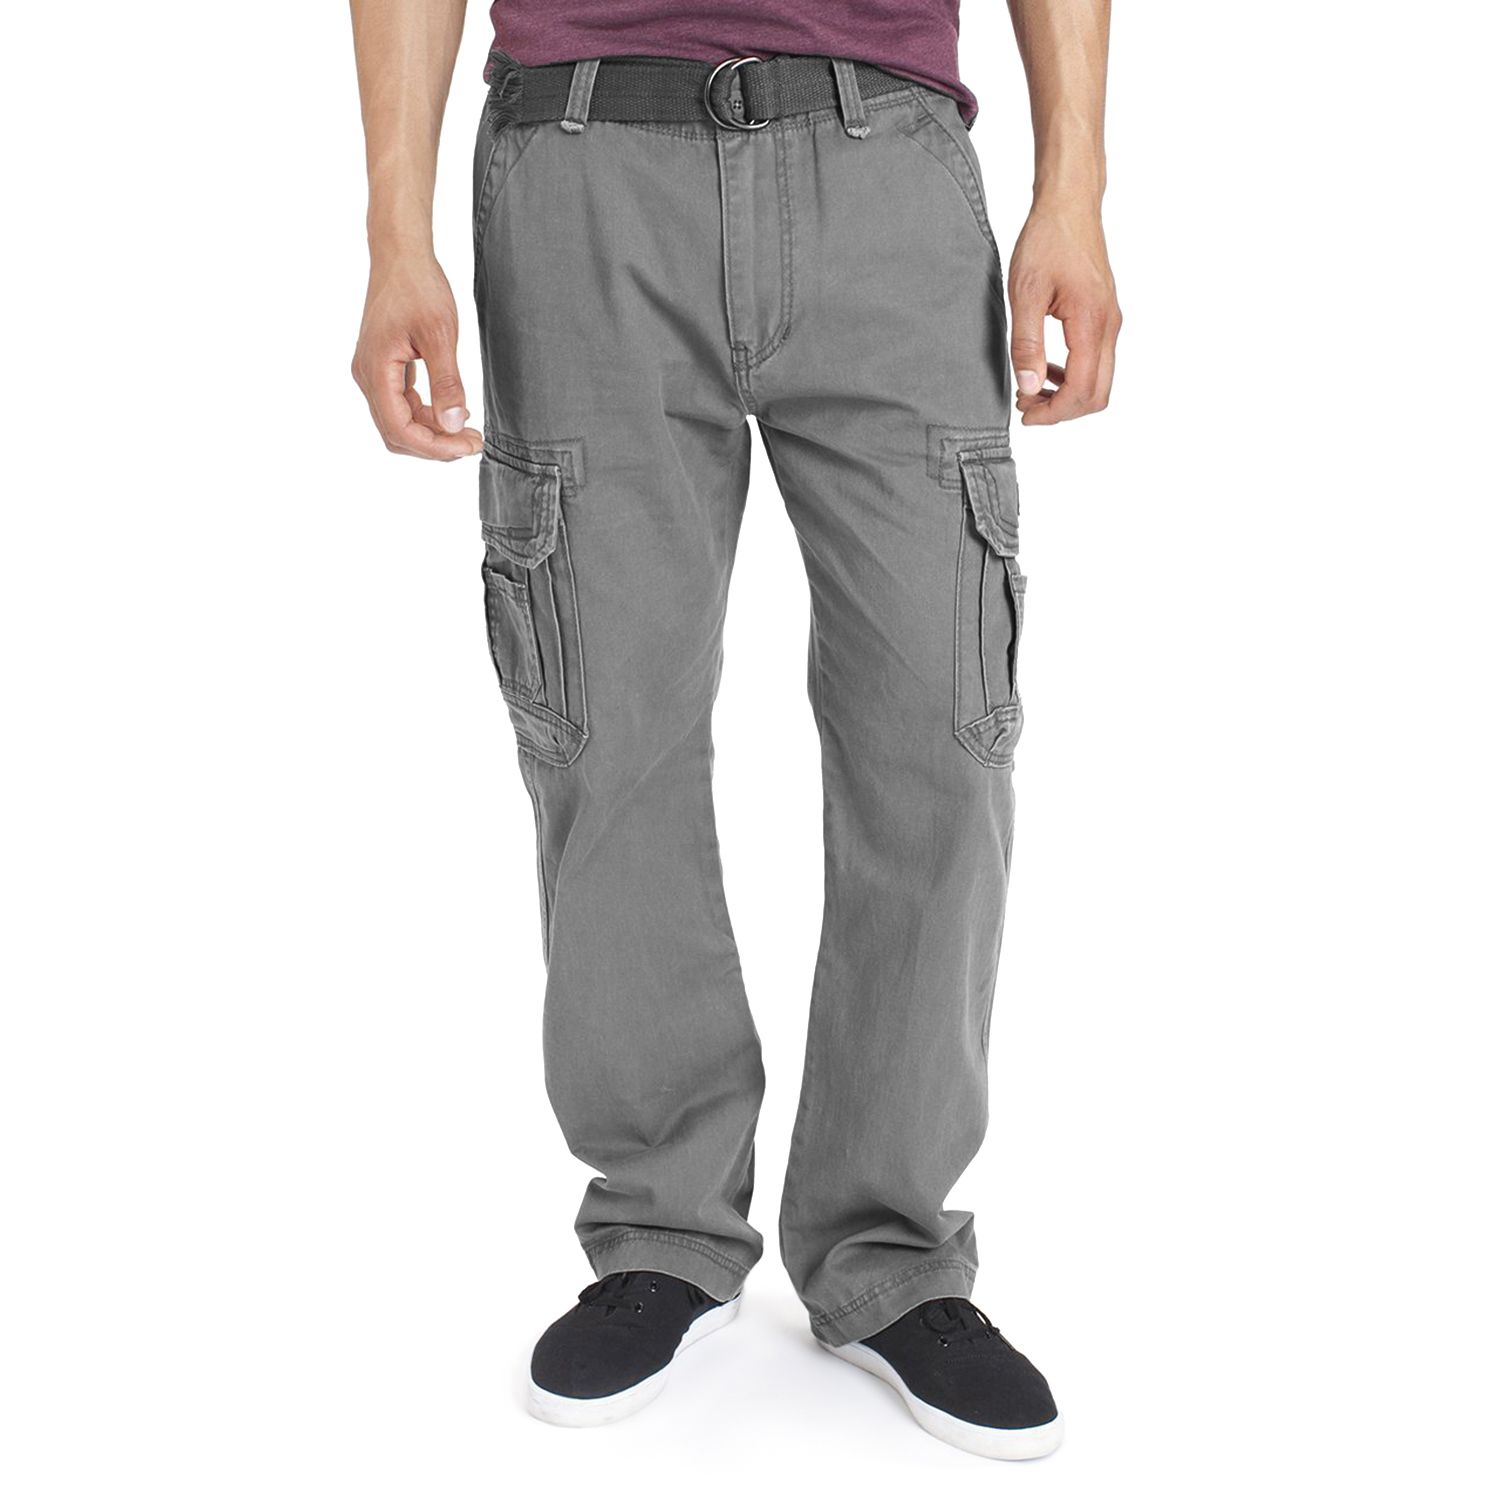 grey cargo trousers mens